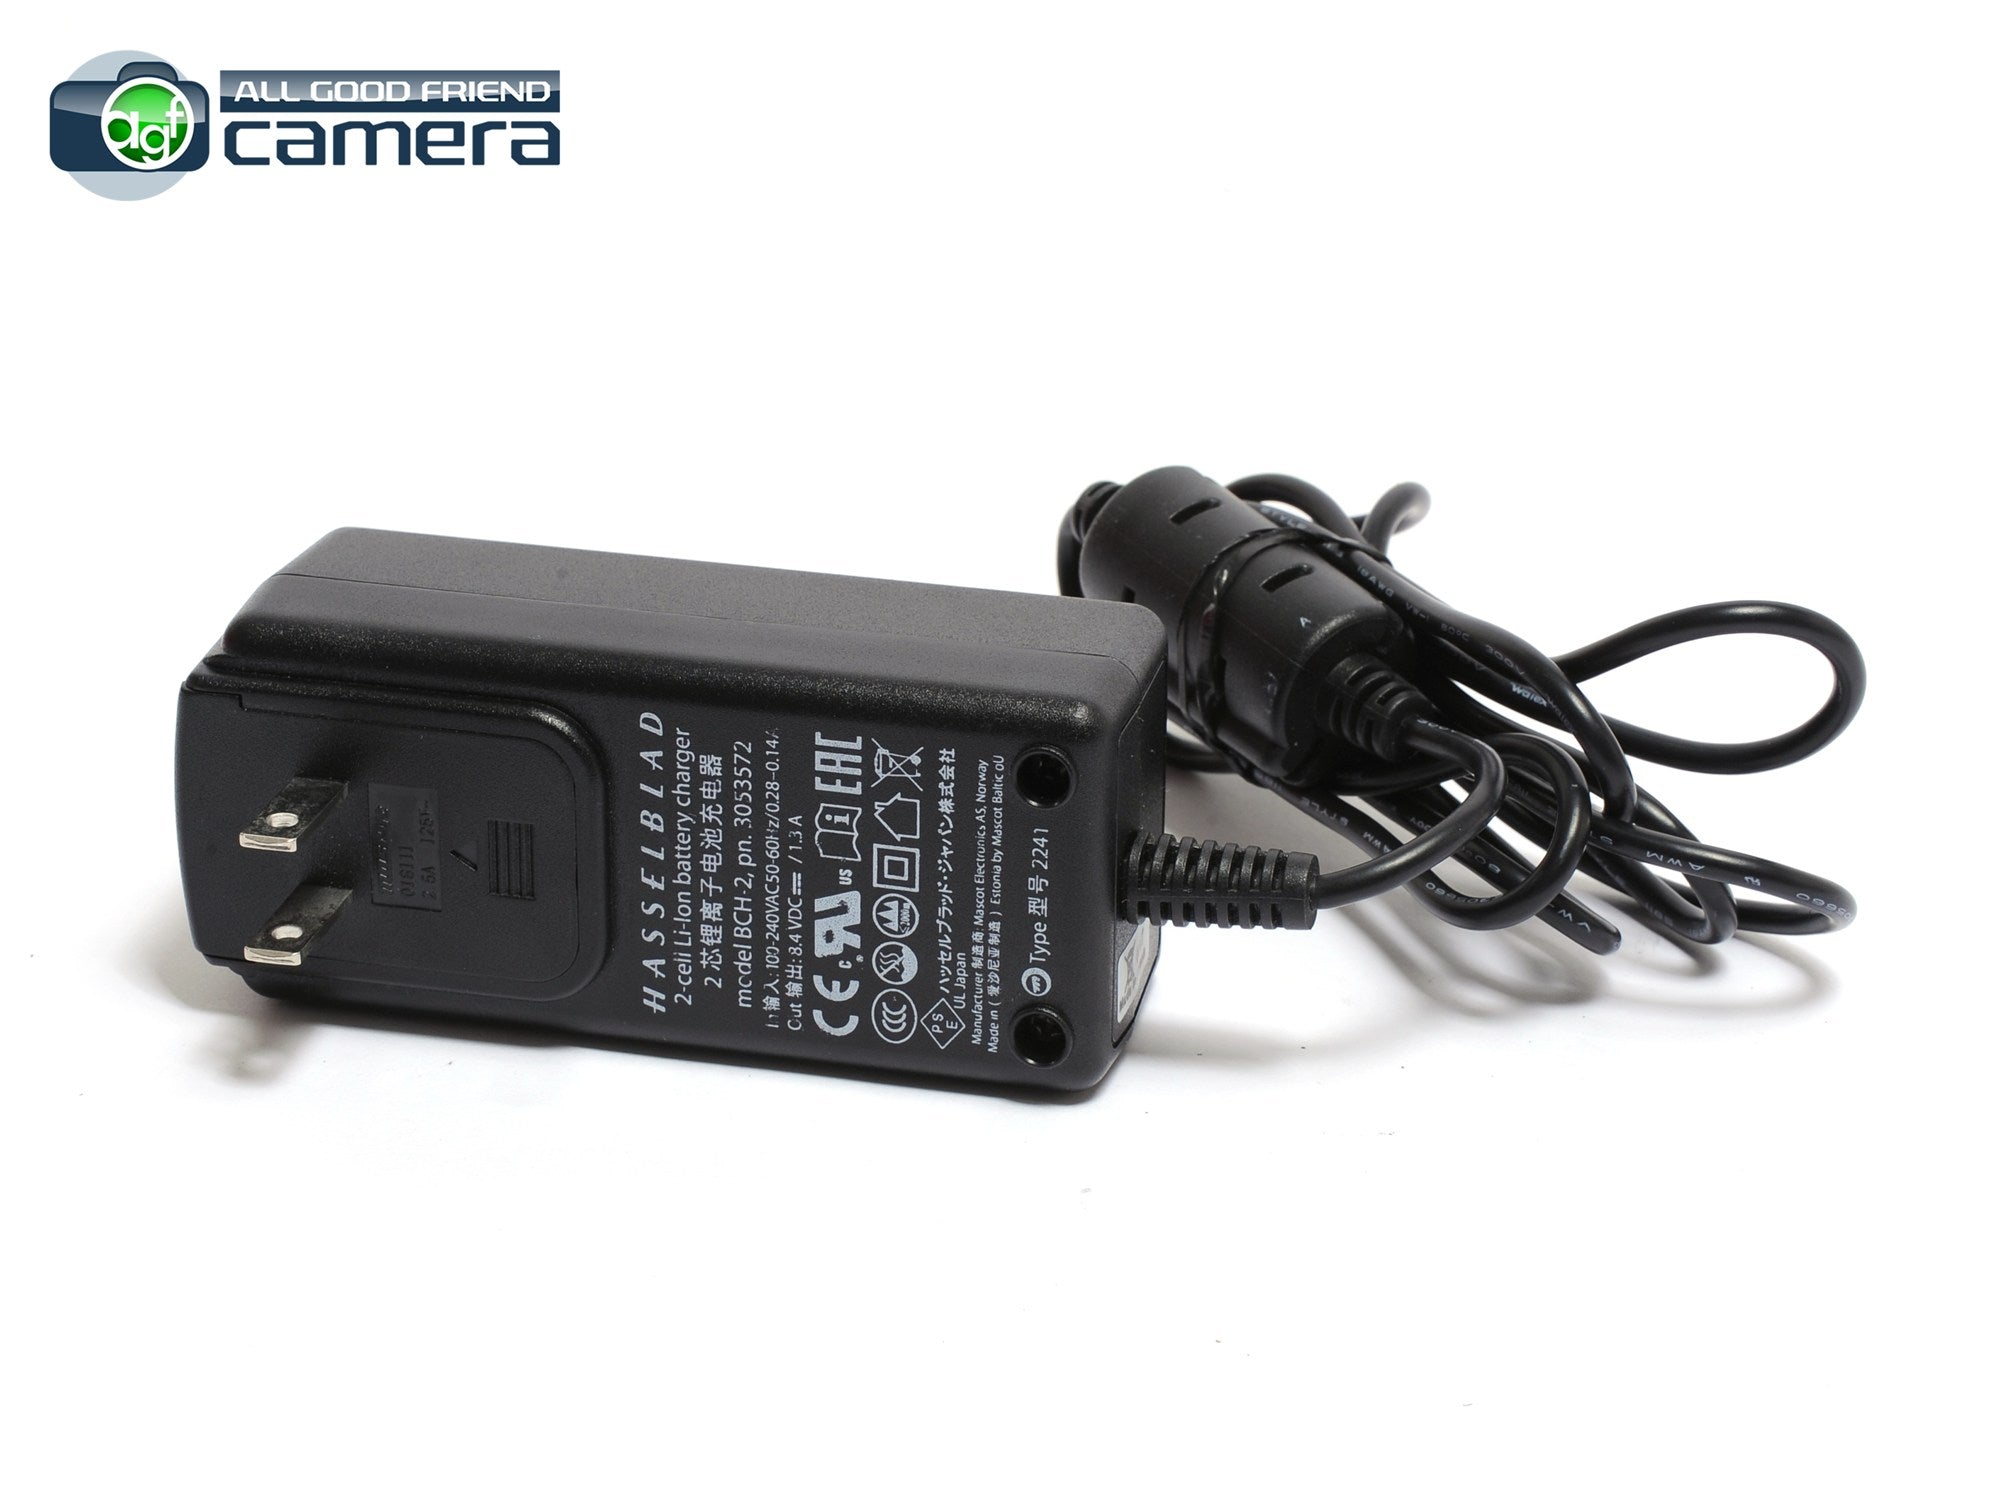 Hasselblad Battery Charger BCH-2 for 2900mAh Li-Ion Battery Grip